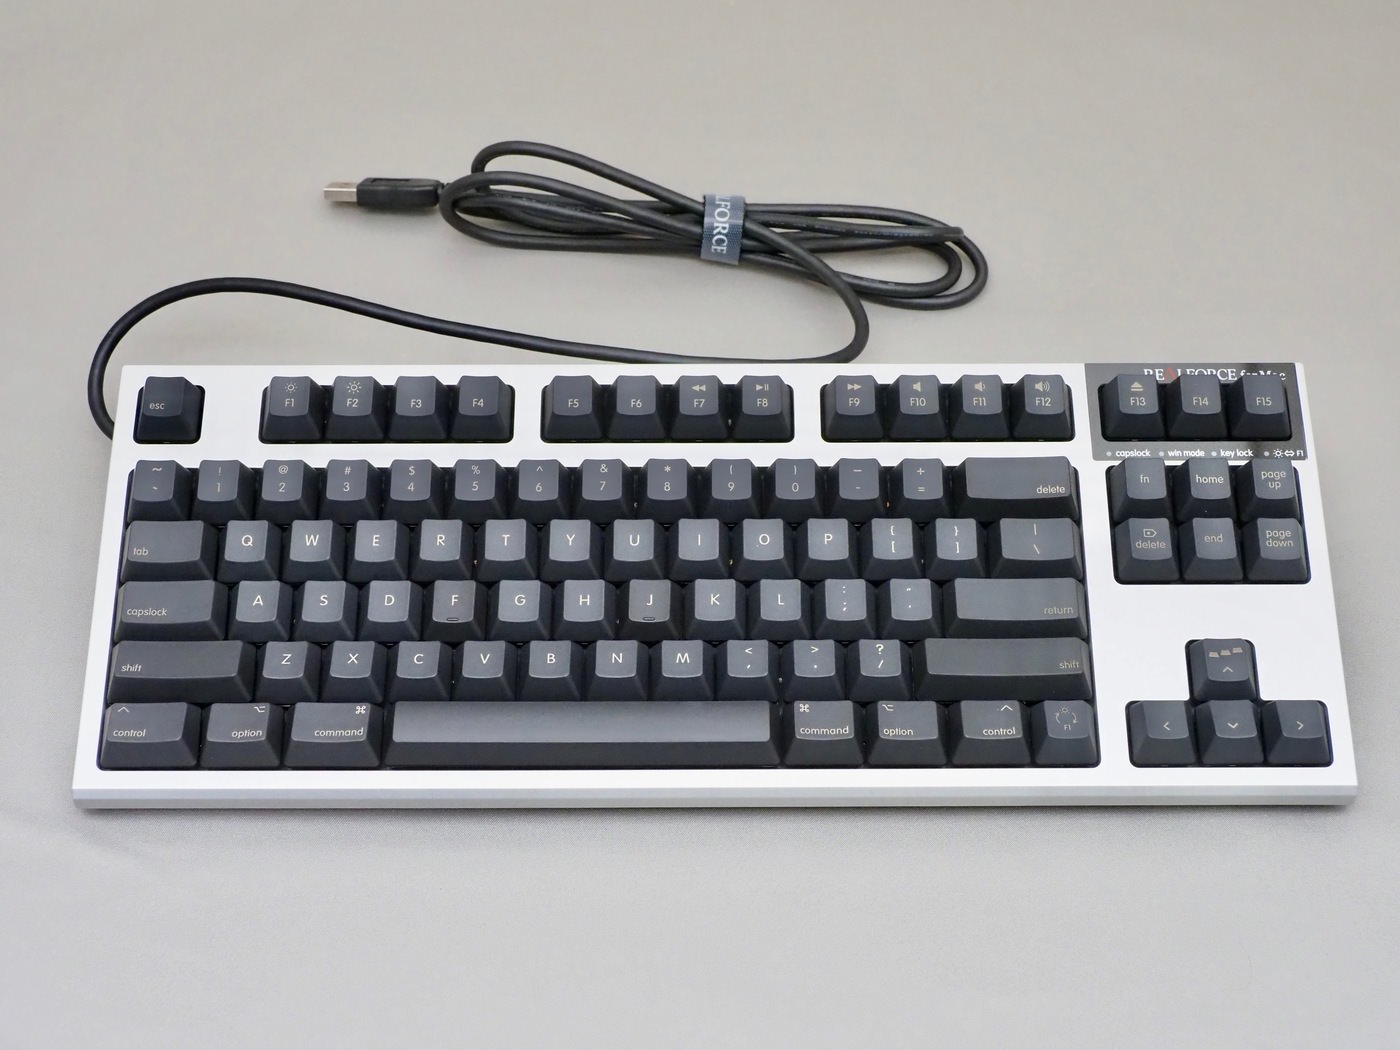 realforce-tkl-for-mac-pfu-limited-edition-review_00006